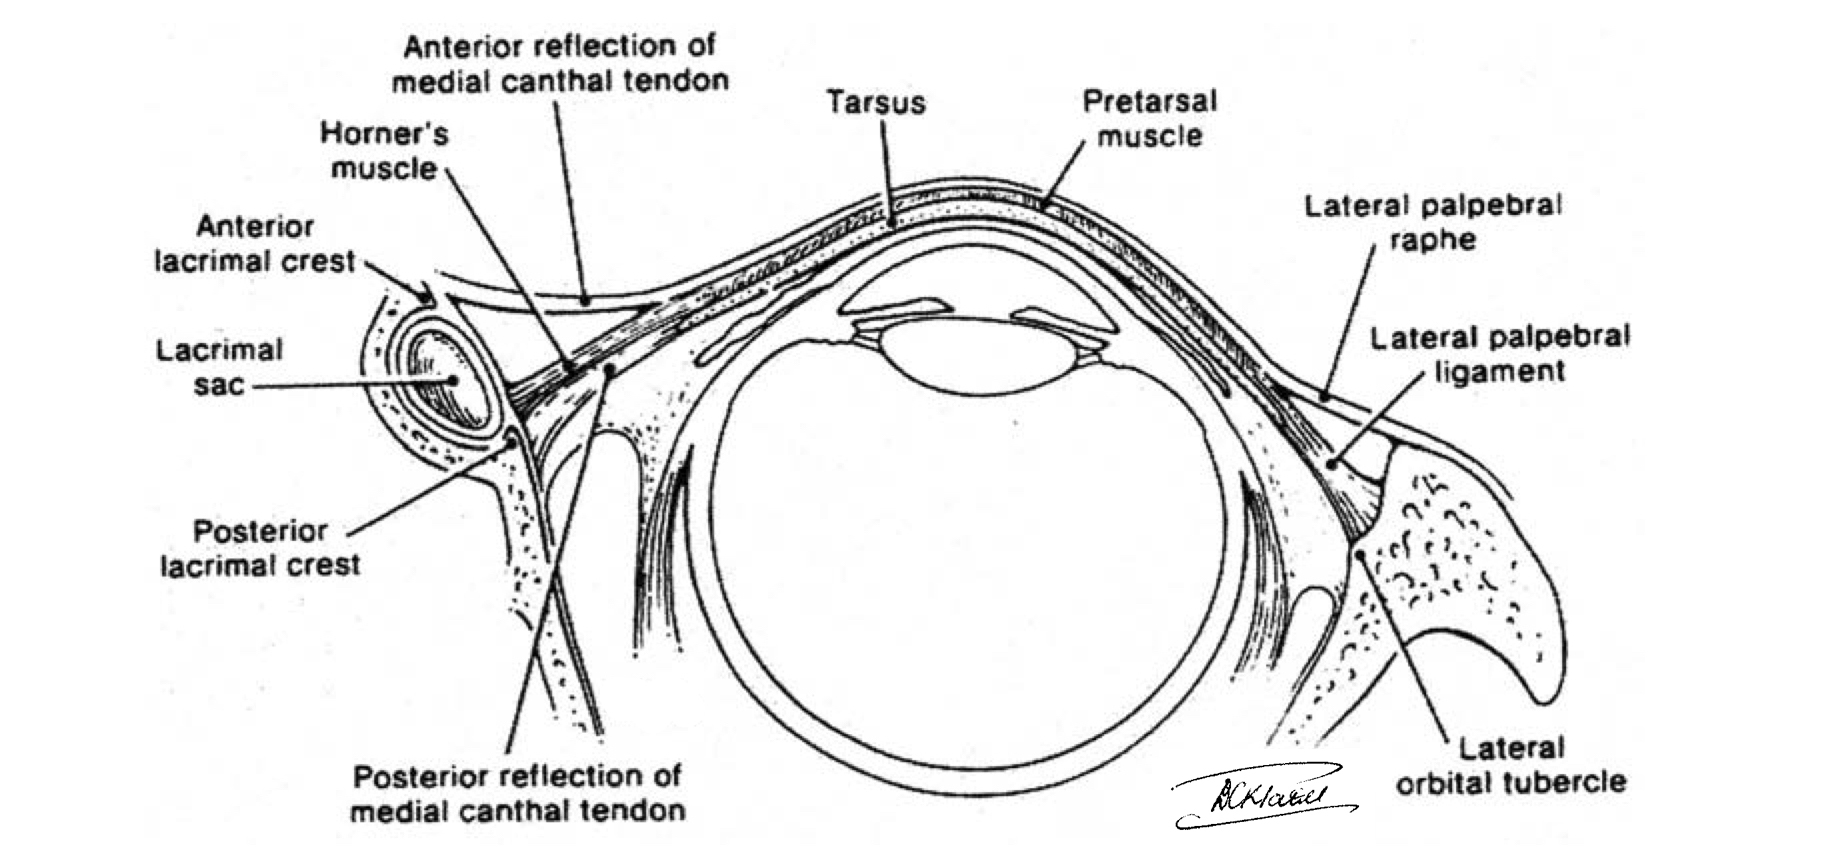 Lower Eyelid Cross-sectional anatomy: the medial canthal tendon has an anterior reflection with inserts to the anterior lacrimal crest and a posterior limb which attaches to the posterior lacrimal crest